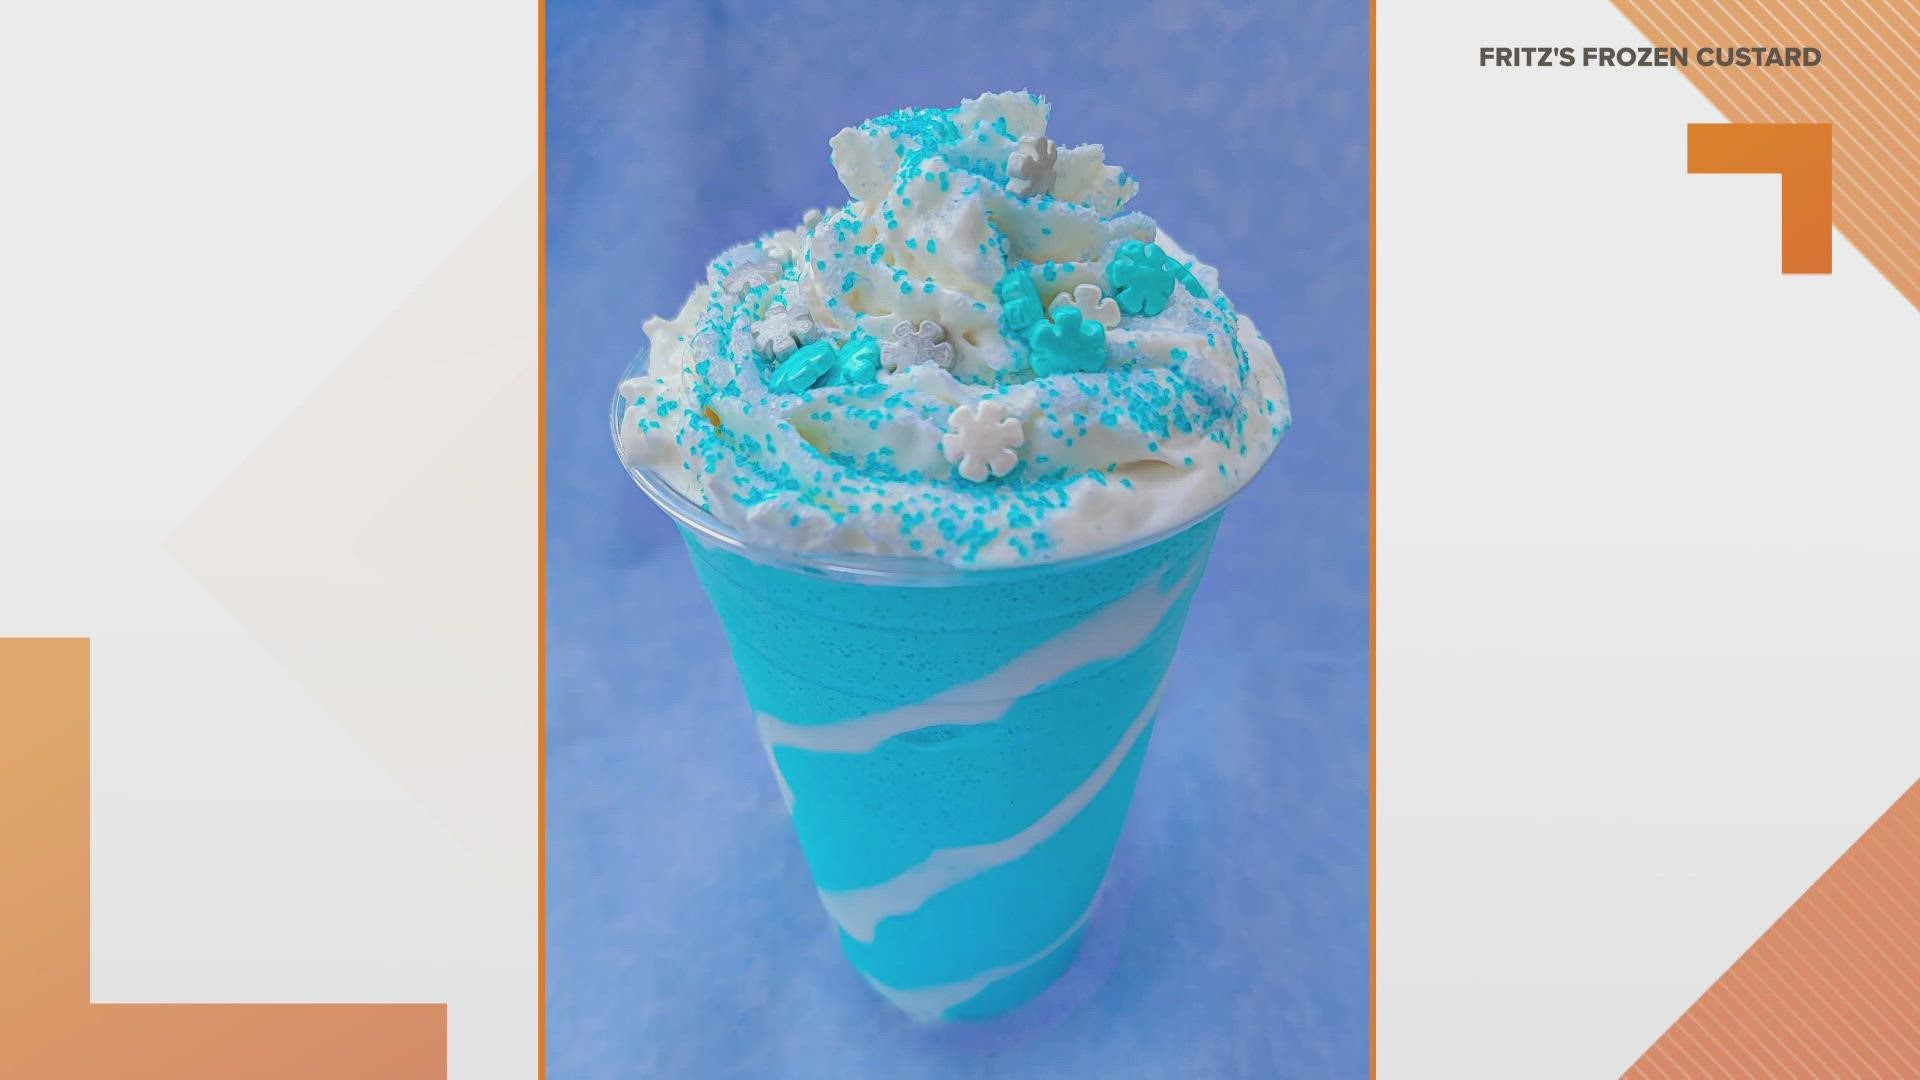 The "Winter Turbo" is vanilla custard mixed with icy blue raspberry slush and topped with a winter mix of whipped cream and snow crystals.